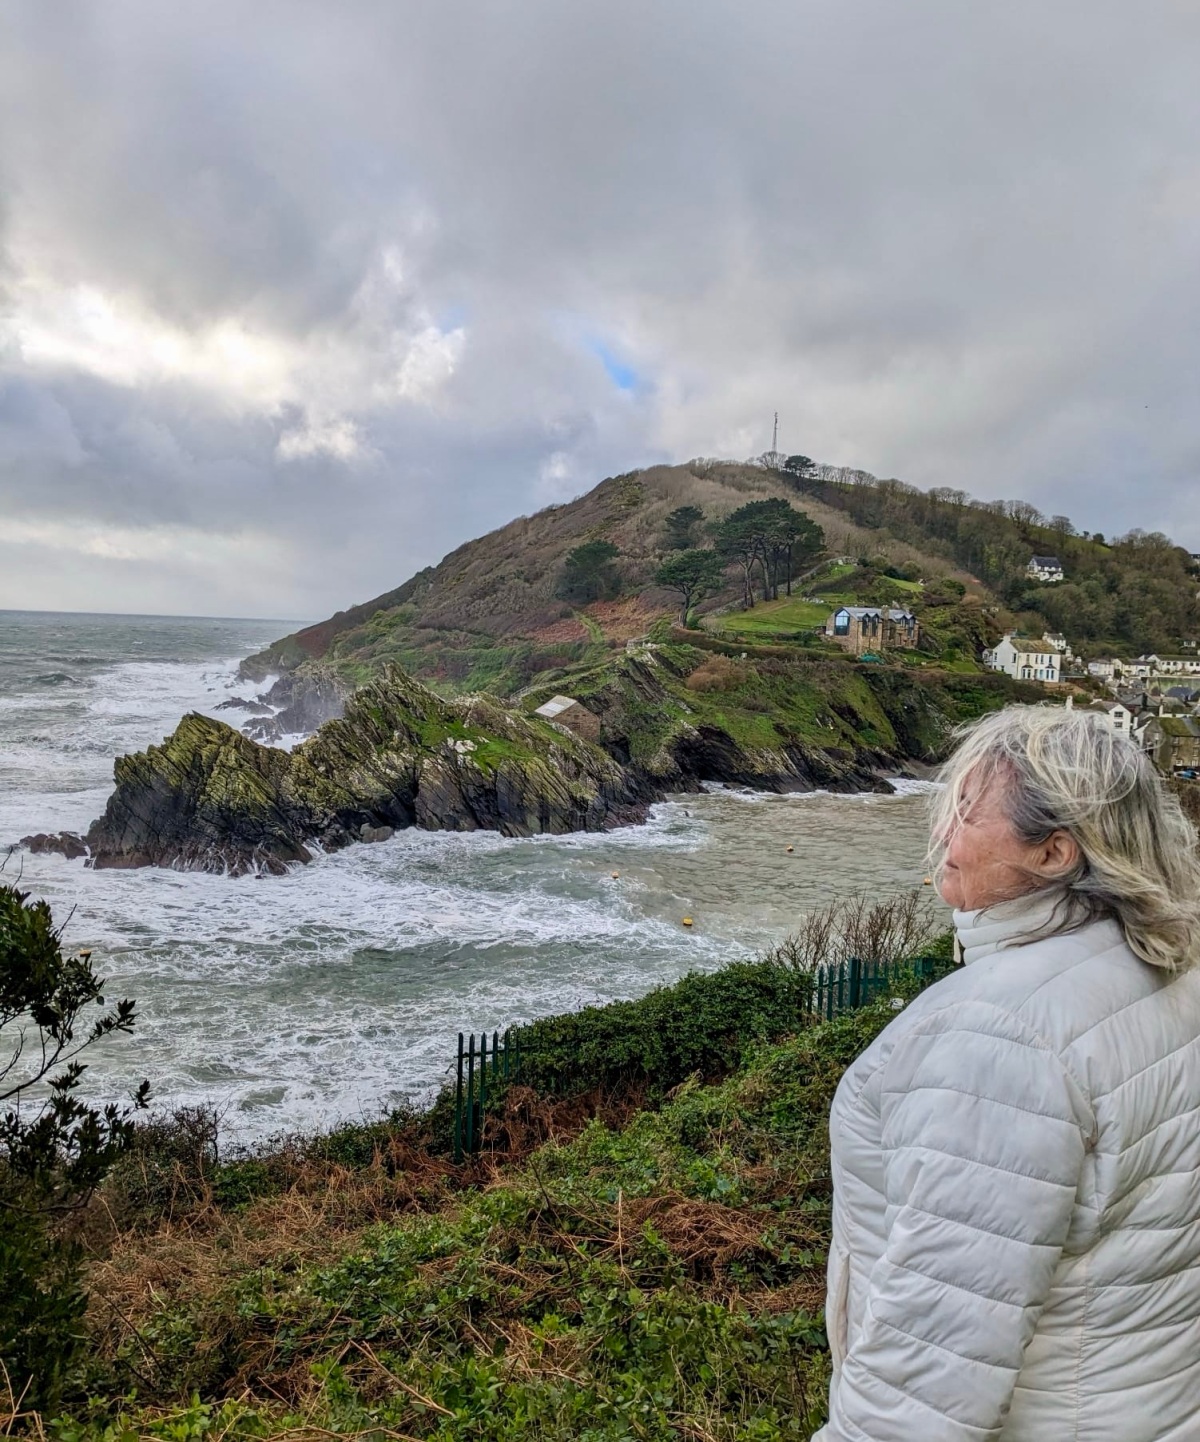 Westgate to Birmingham (Well Sort Of) on to Plymouth and Polperro Cornwall and Back to Westgate – Kind of a golden triangle only rainy.